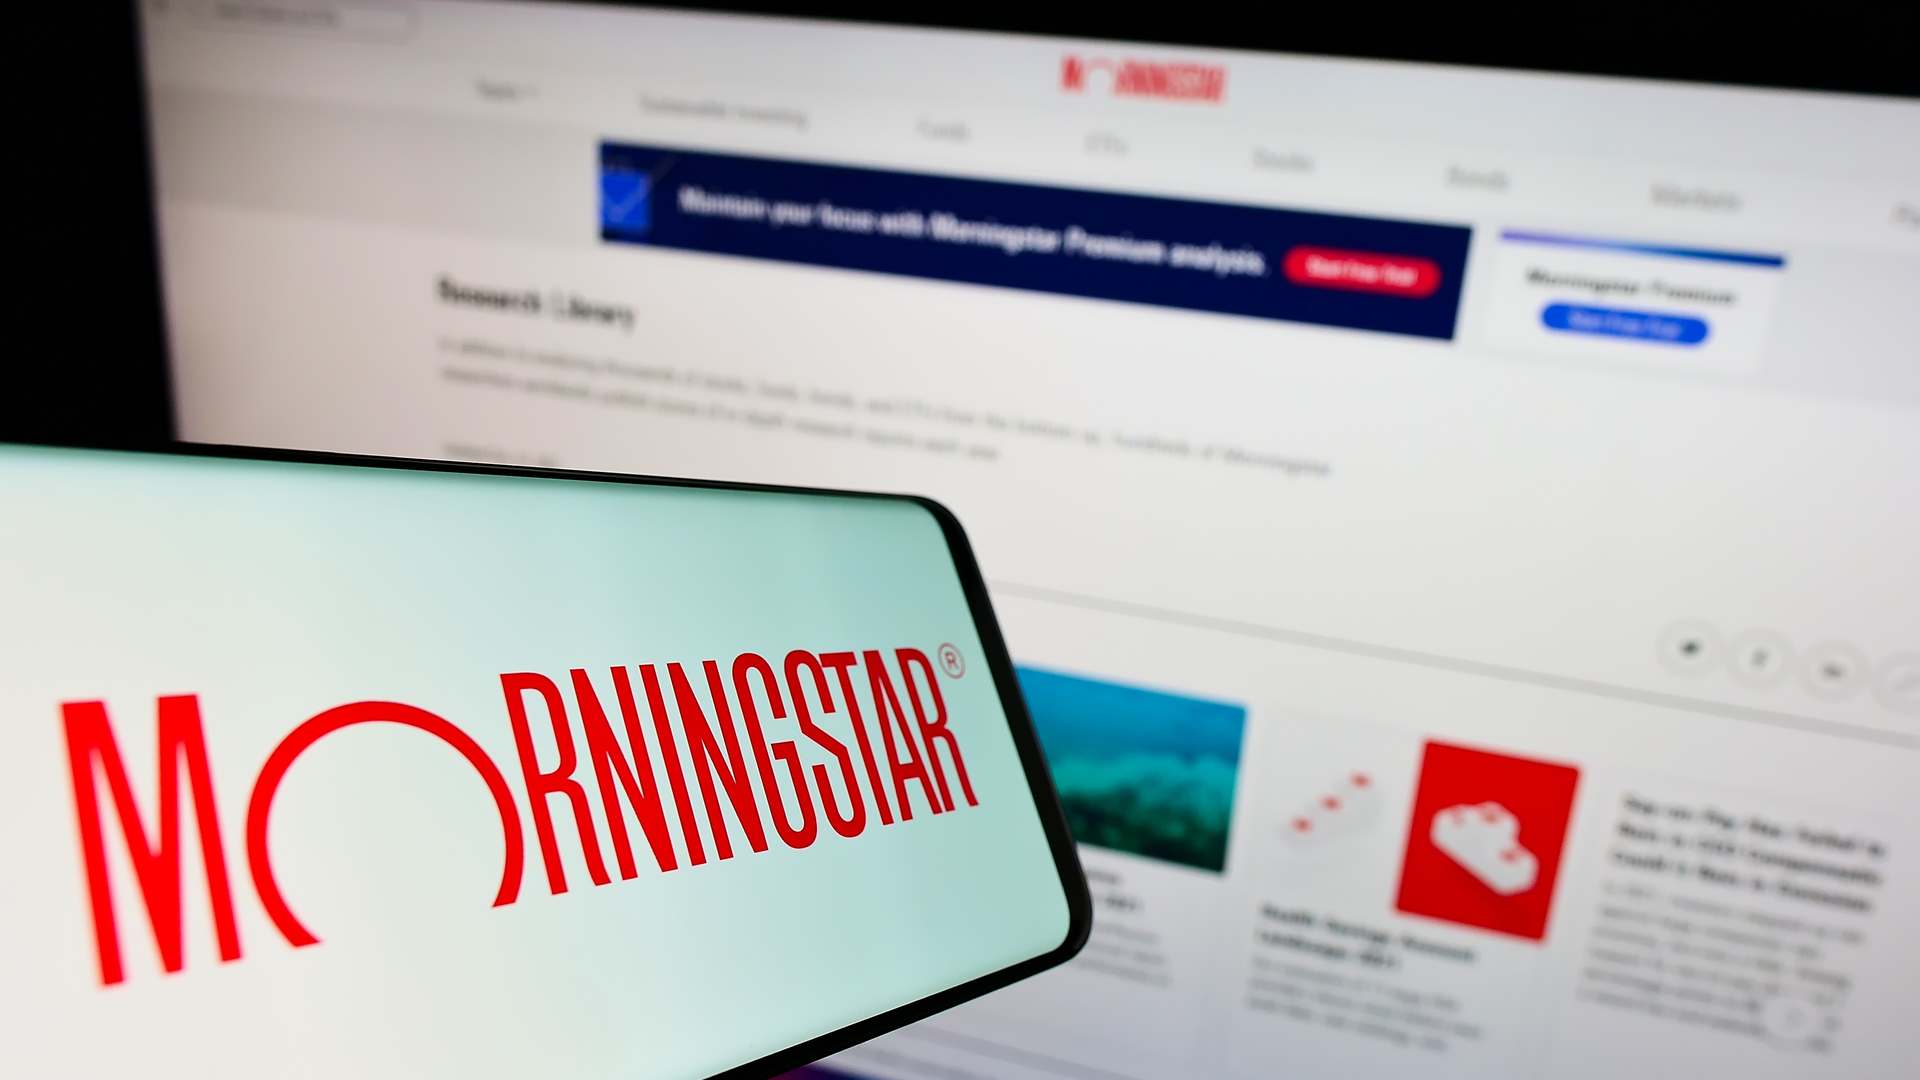 Morningstar: Research Stocks with Confidence